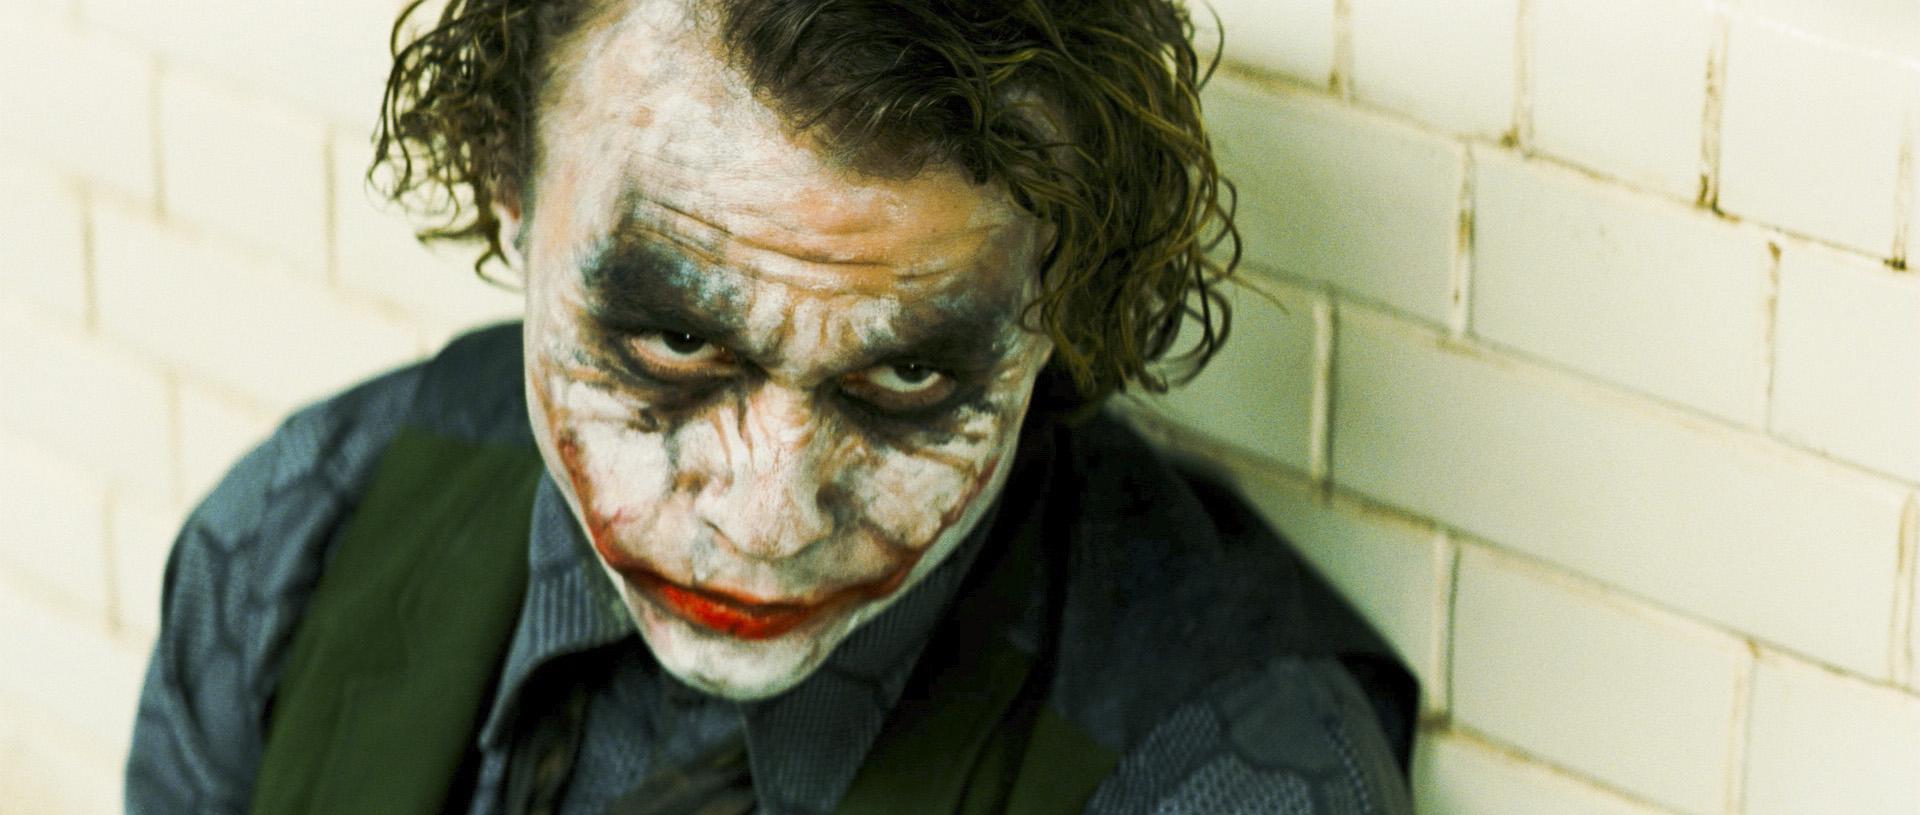 Happy Birthday to the worst Joker to ever appear in a movie ever. RIP Heath Ledger. 